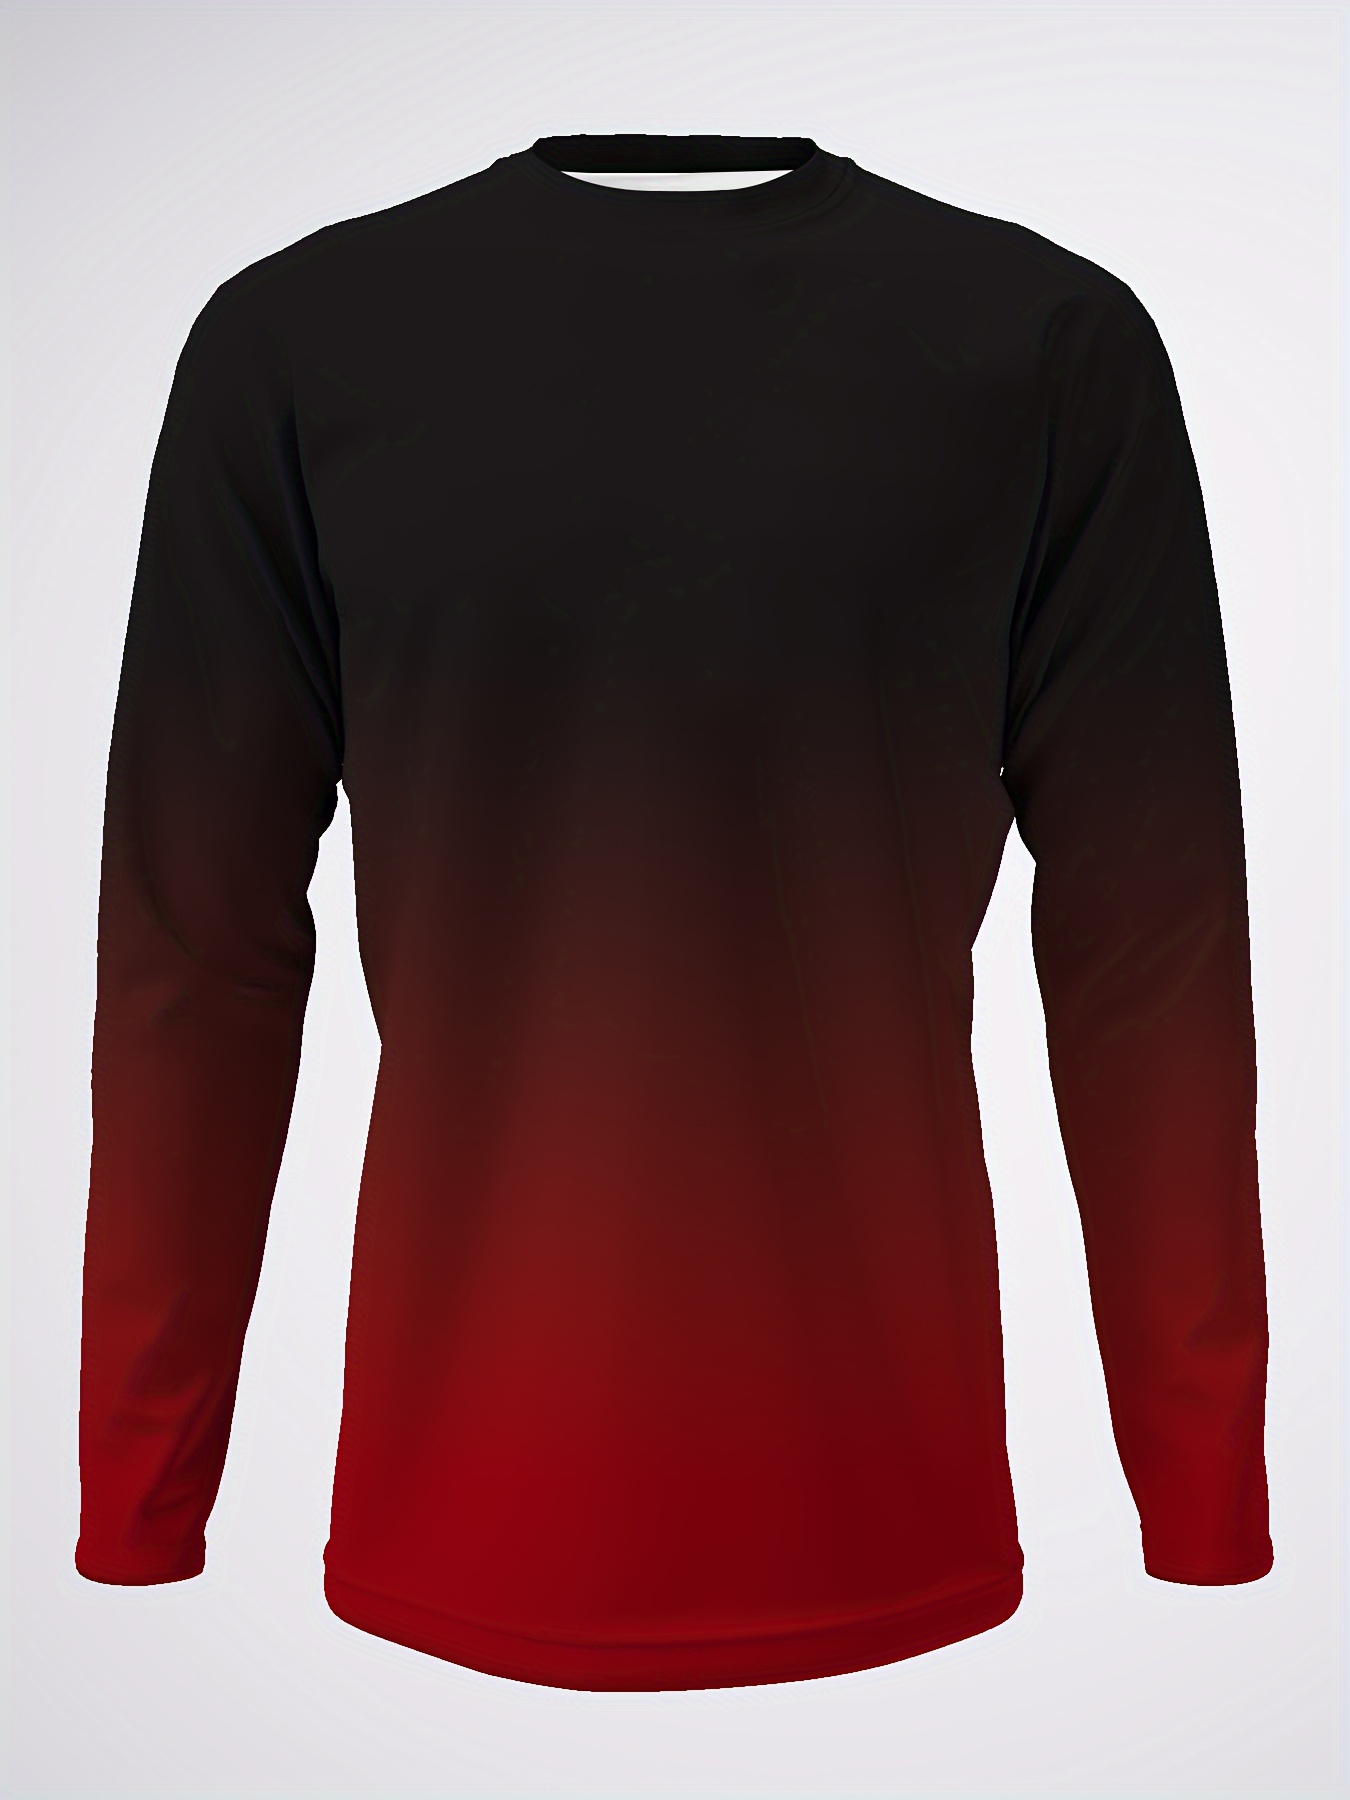 Uv Protection Topsmen's Uv Protection Long Sleeve Tee - Solid